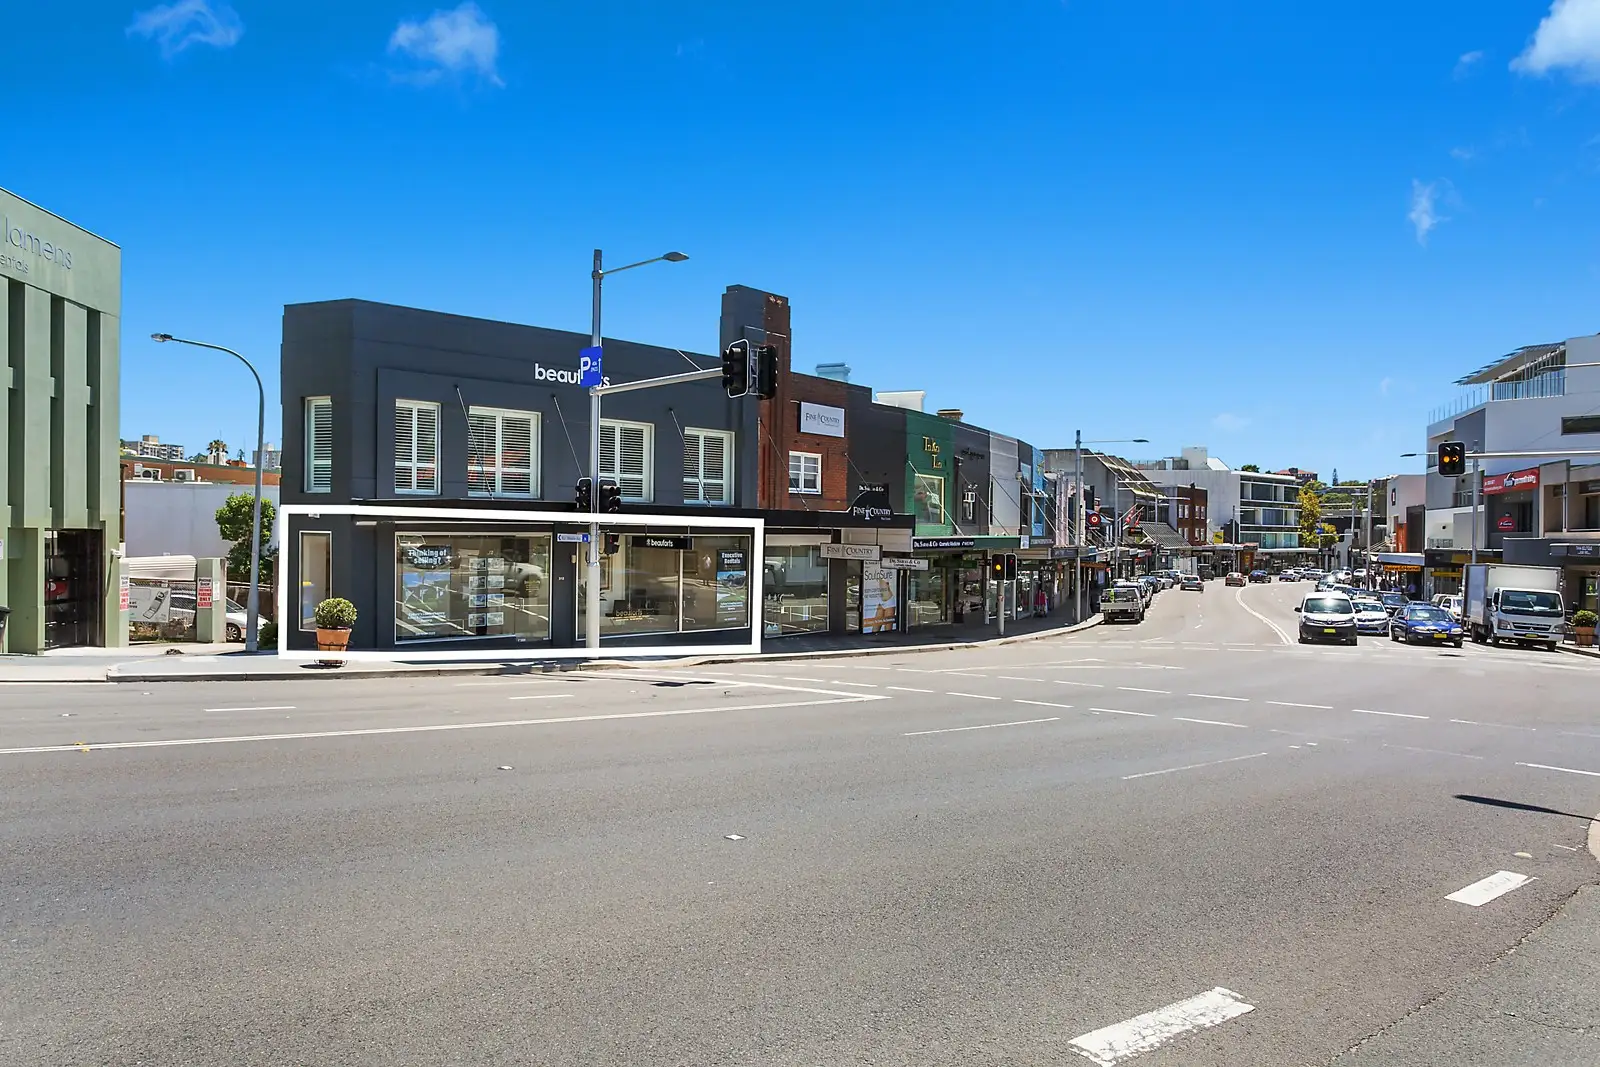 312 - 314 New South Head Road, Double Bay Leased by Sydney Sotheby's International Realty - image 1